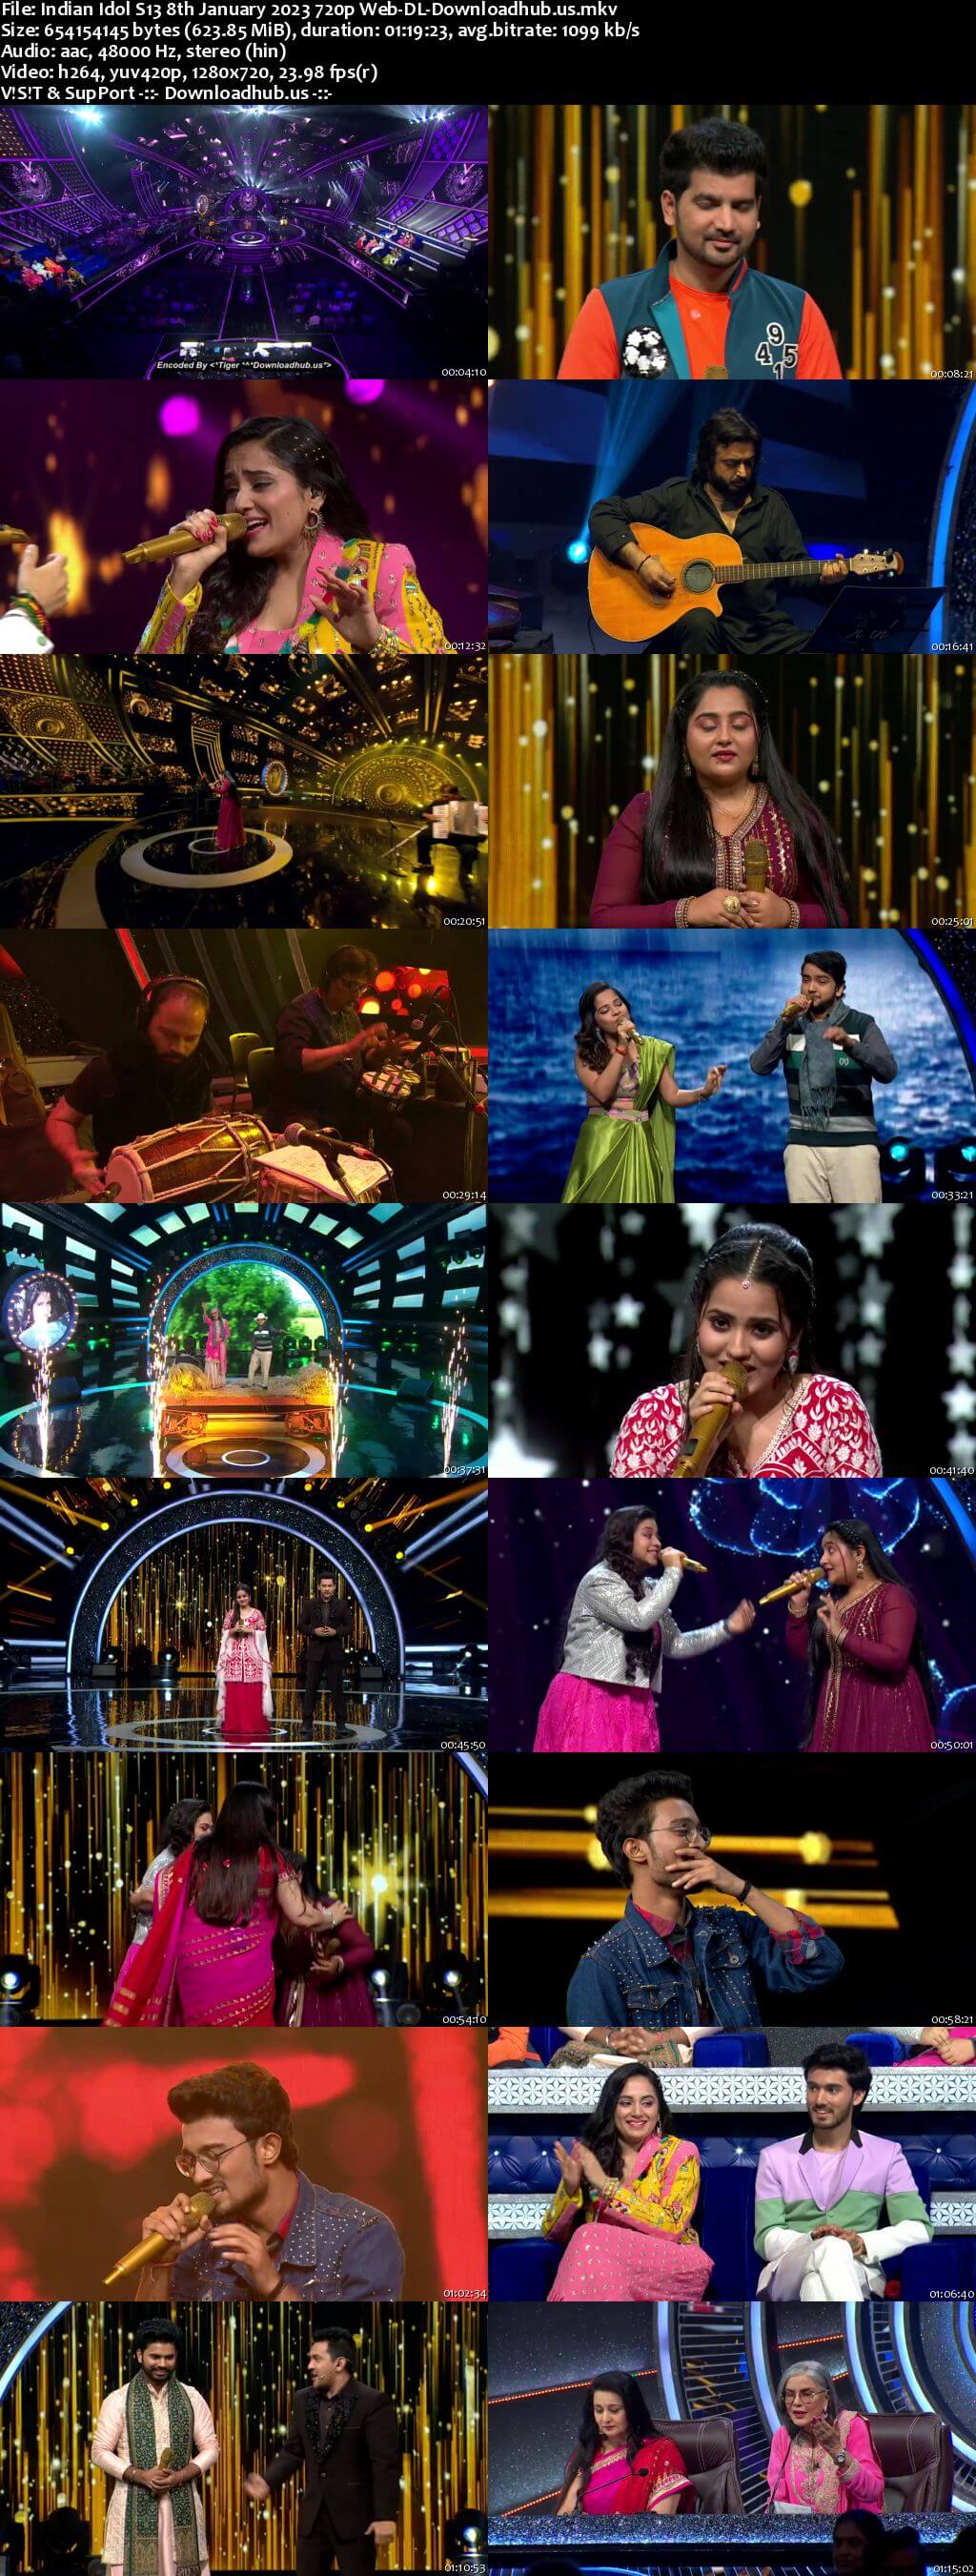 Indian Idol S13 08 January 2023 Episode 36 Web-DL 720p 480p